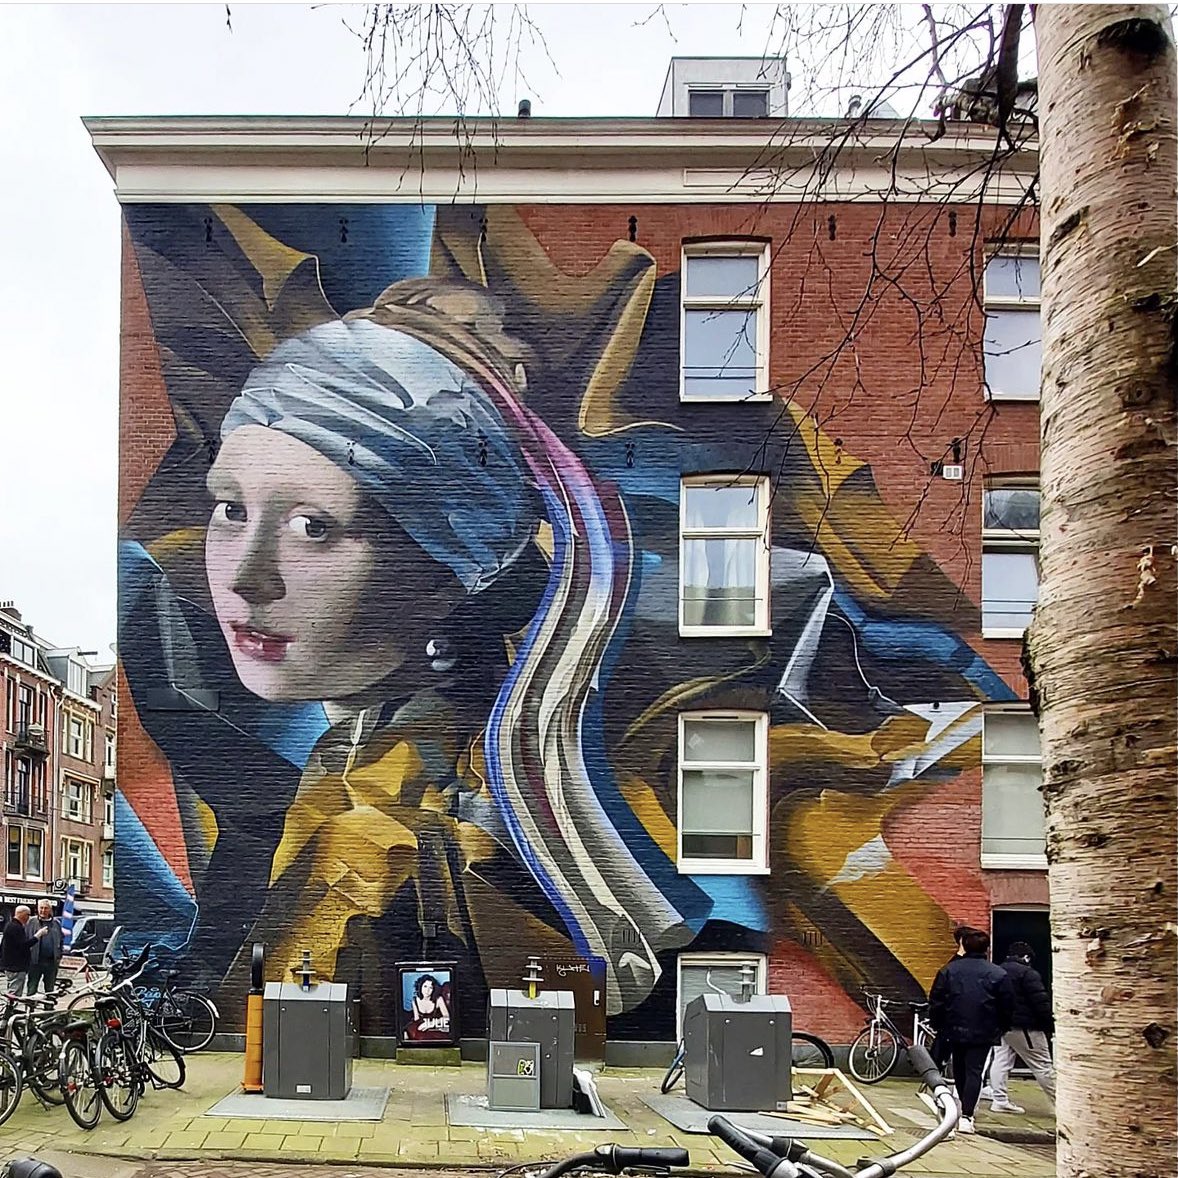 “Pearl of the South”

#StreetArt by Roelof-Beyond
In #Amsterdam #Netherlands